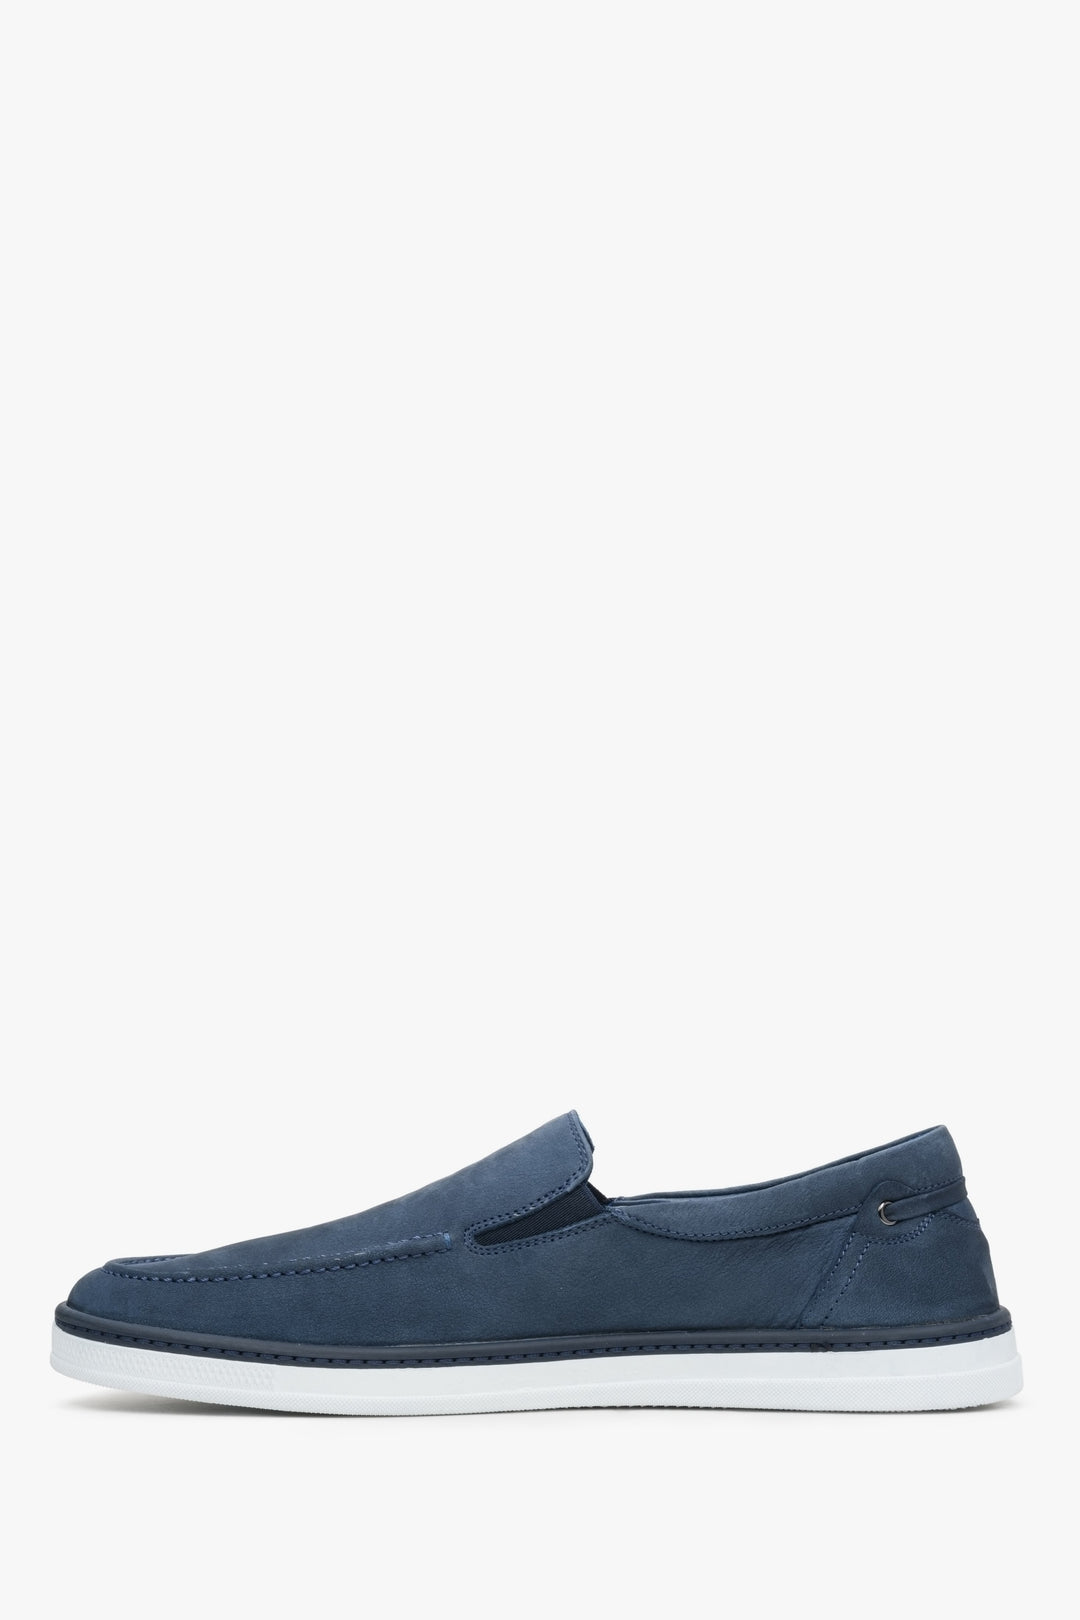 Men's blue nubuck loafers for spring from Estro brand.